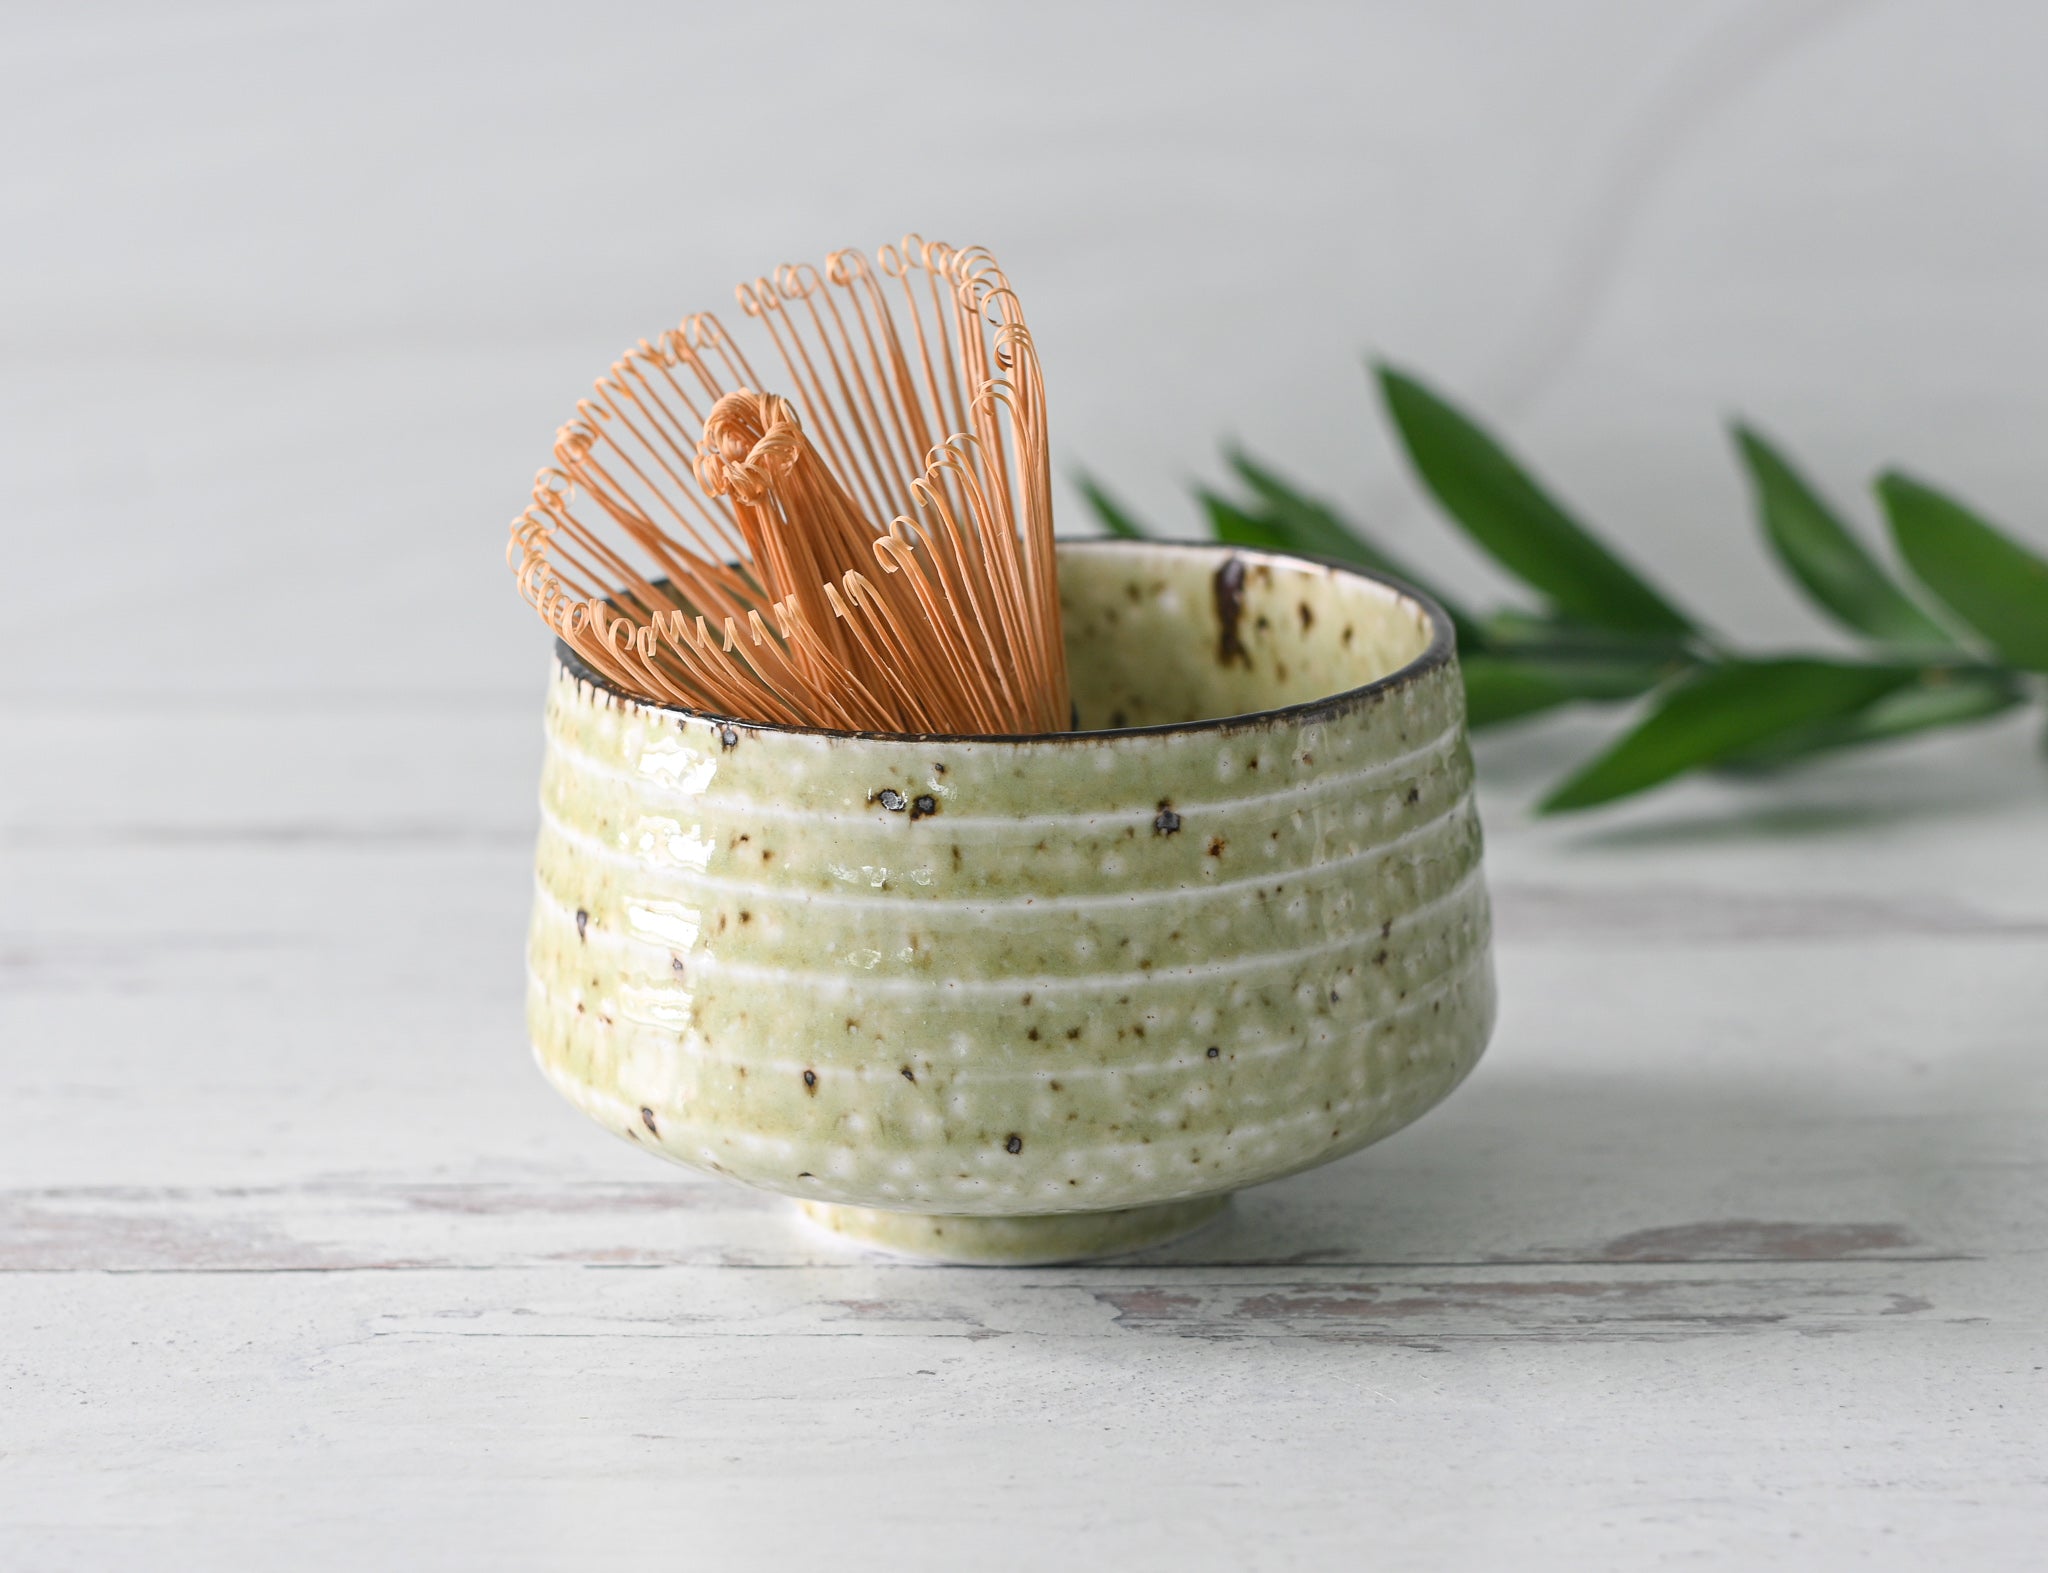 Speckled Ceramic Matcha Bowl With Spout, Pink and White, Matcha